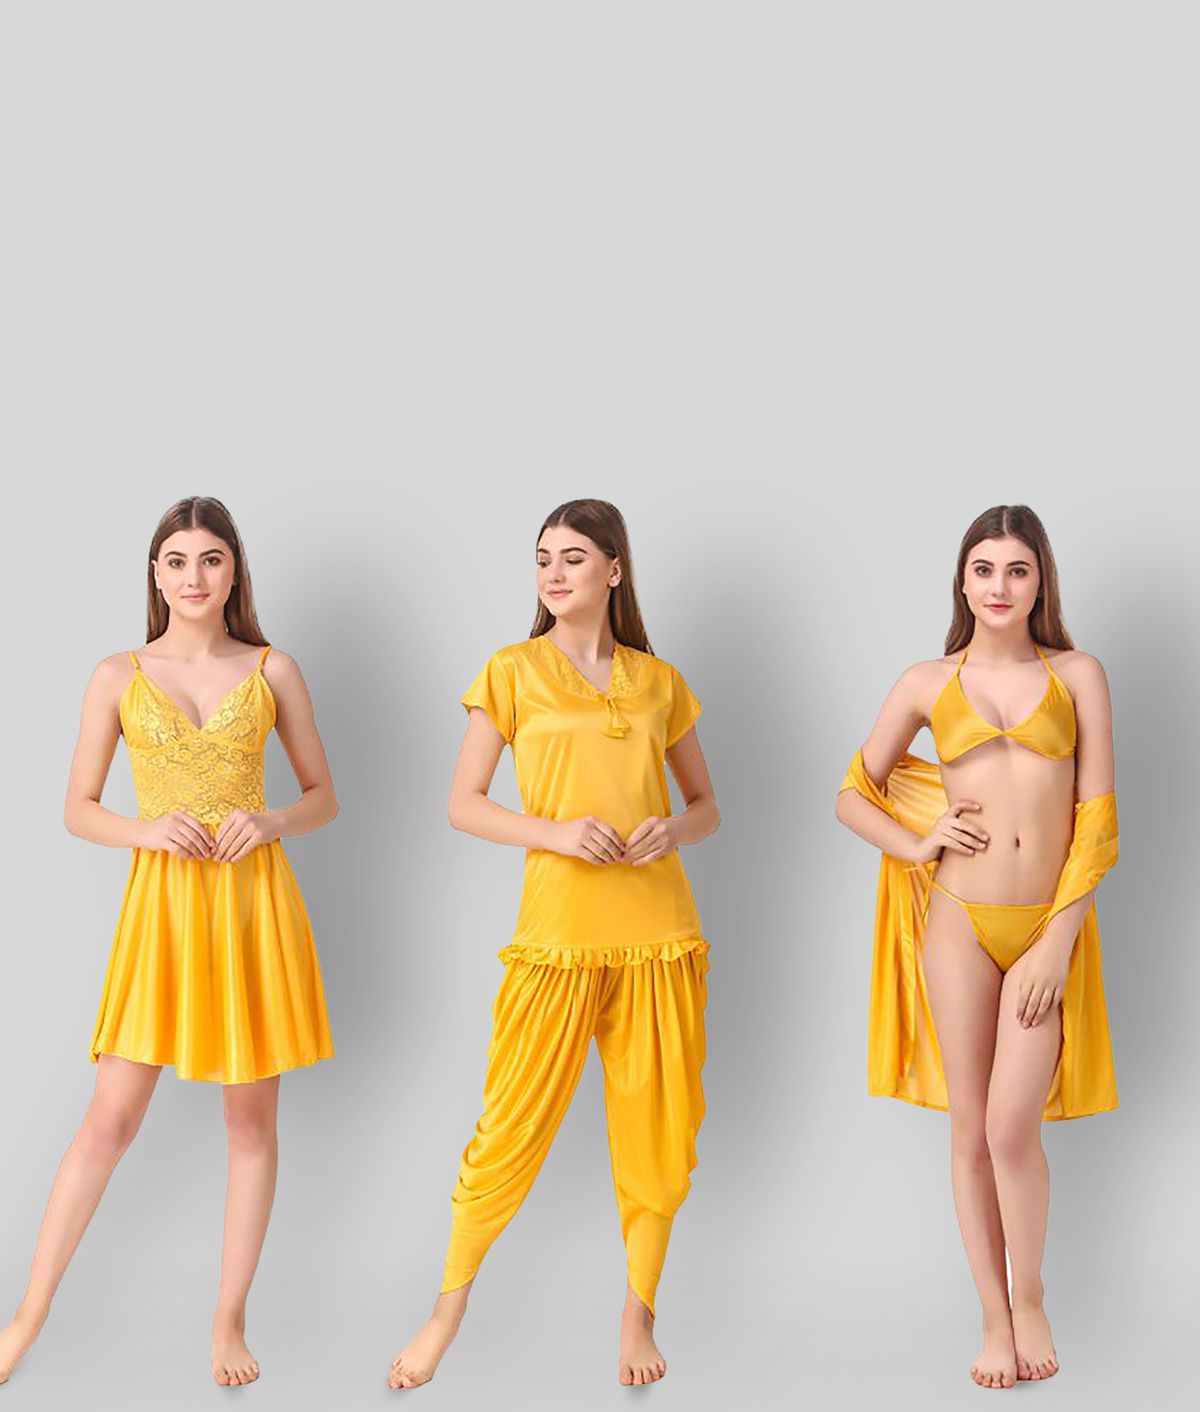     			Romaisa - Yellow Satin Women's Nightwear Baby Doll Dresses With Panty ( Pack of 6 )